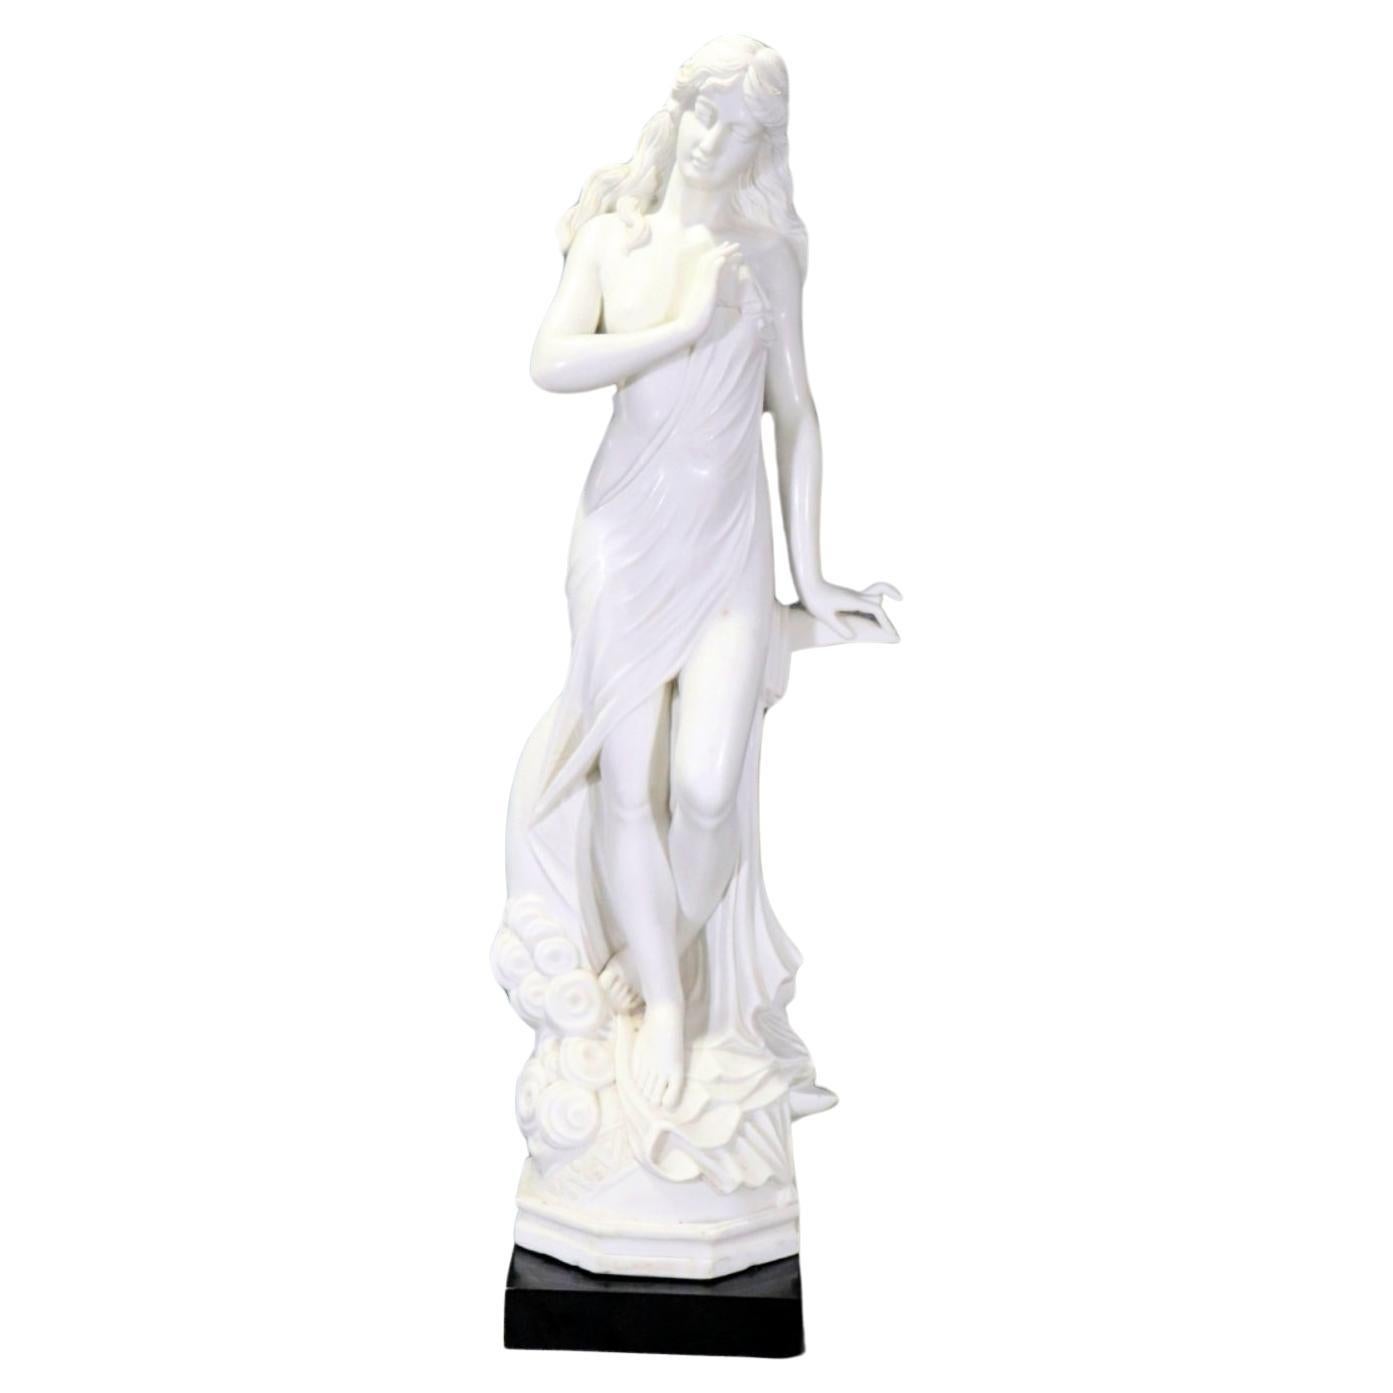 Superb Carved White Cararra Marble Statue of  a Partially Draped Nude Maiden 